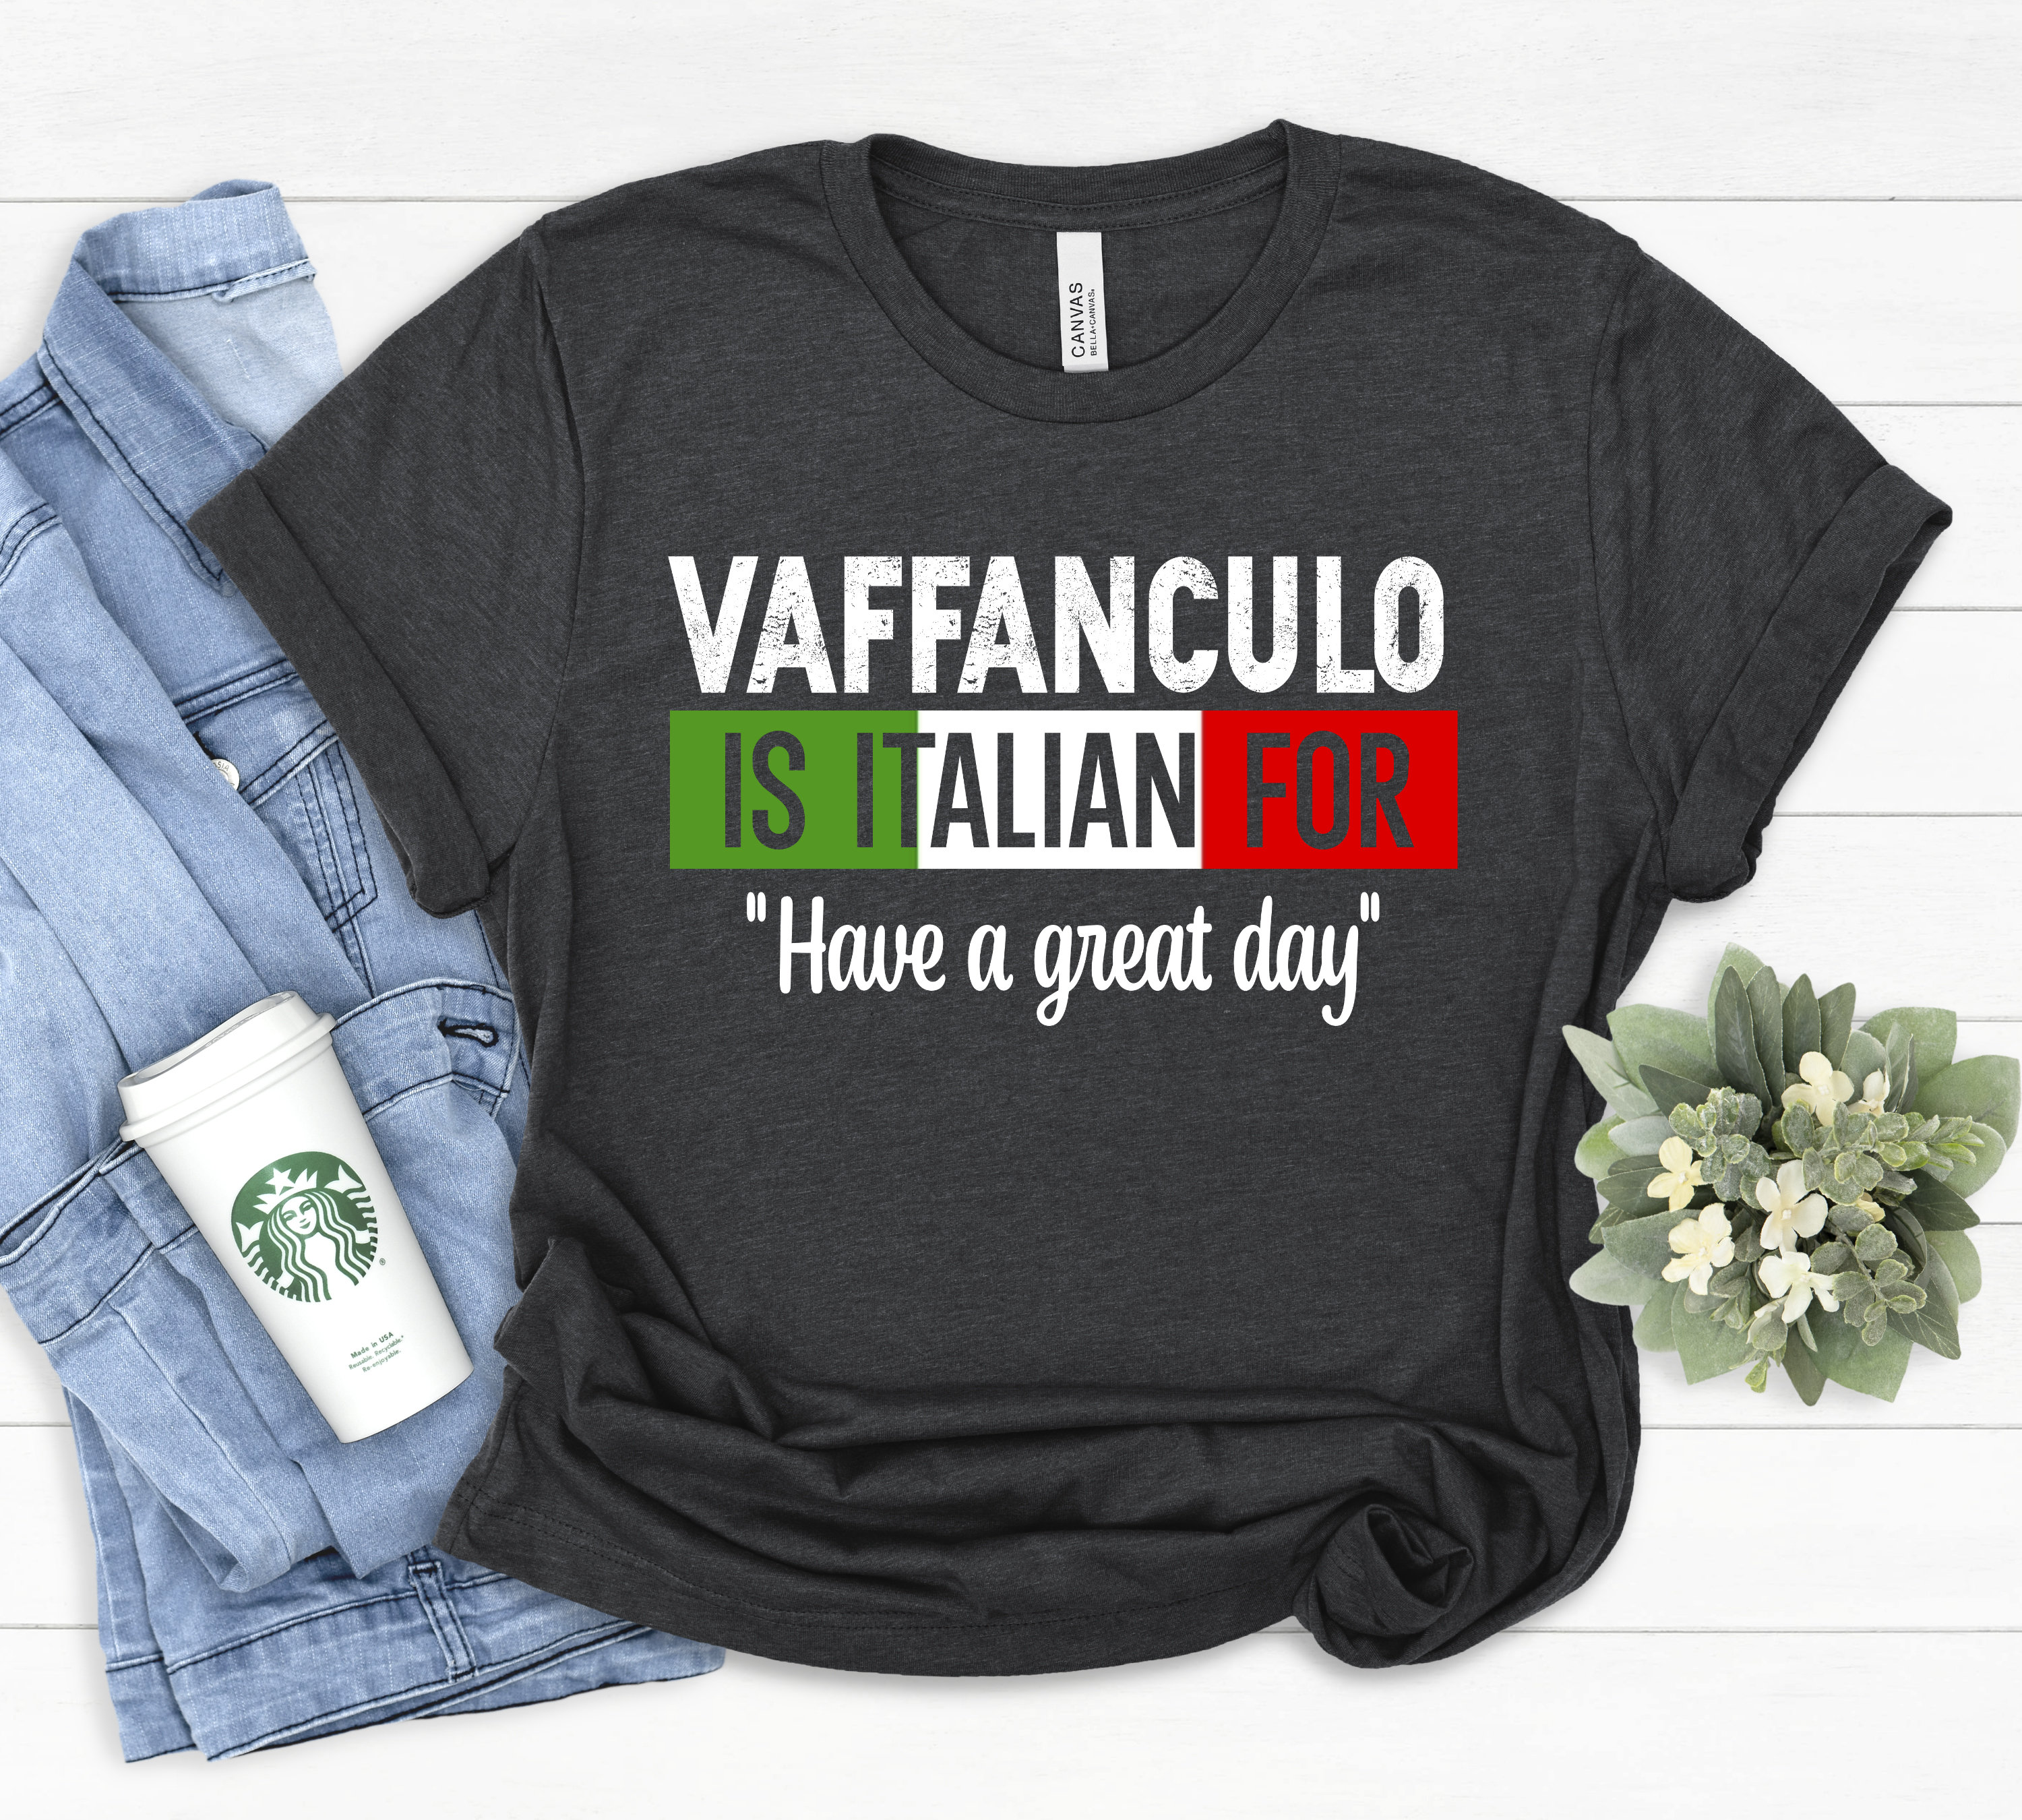 Discover Vaffanculo Is Italian For Have A Great Day, Italia Shirt